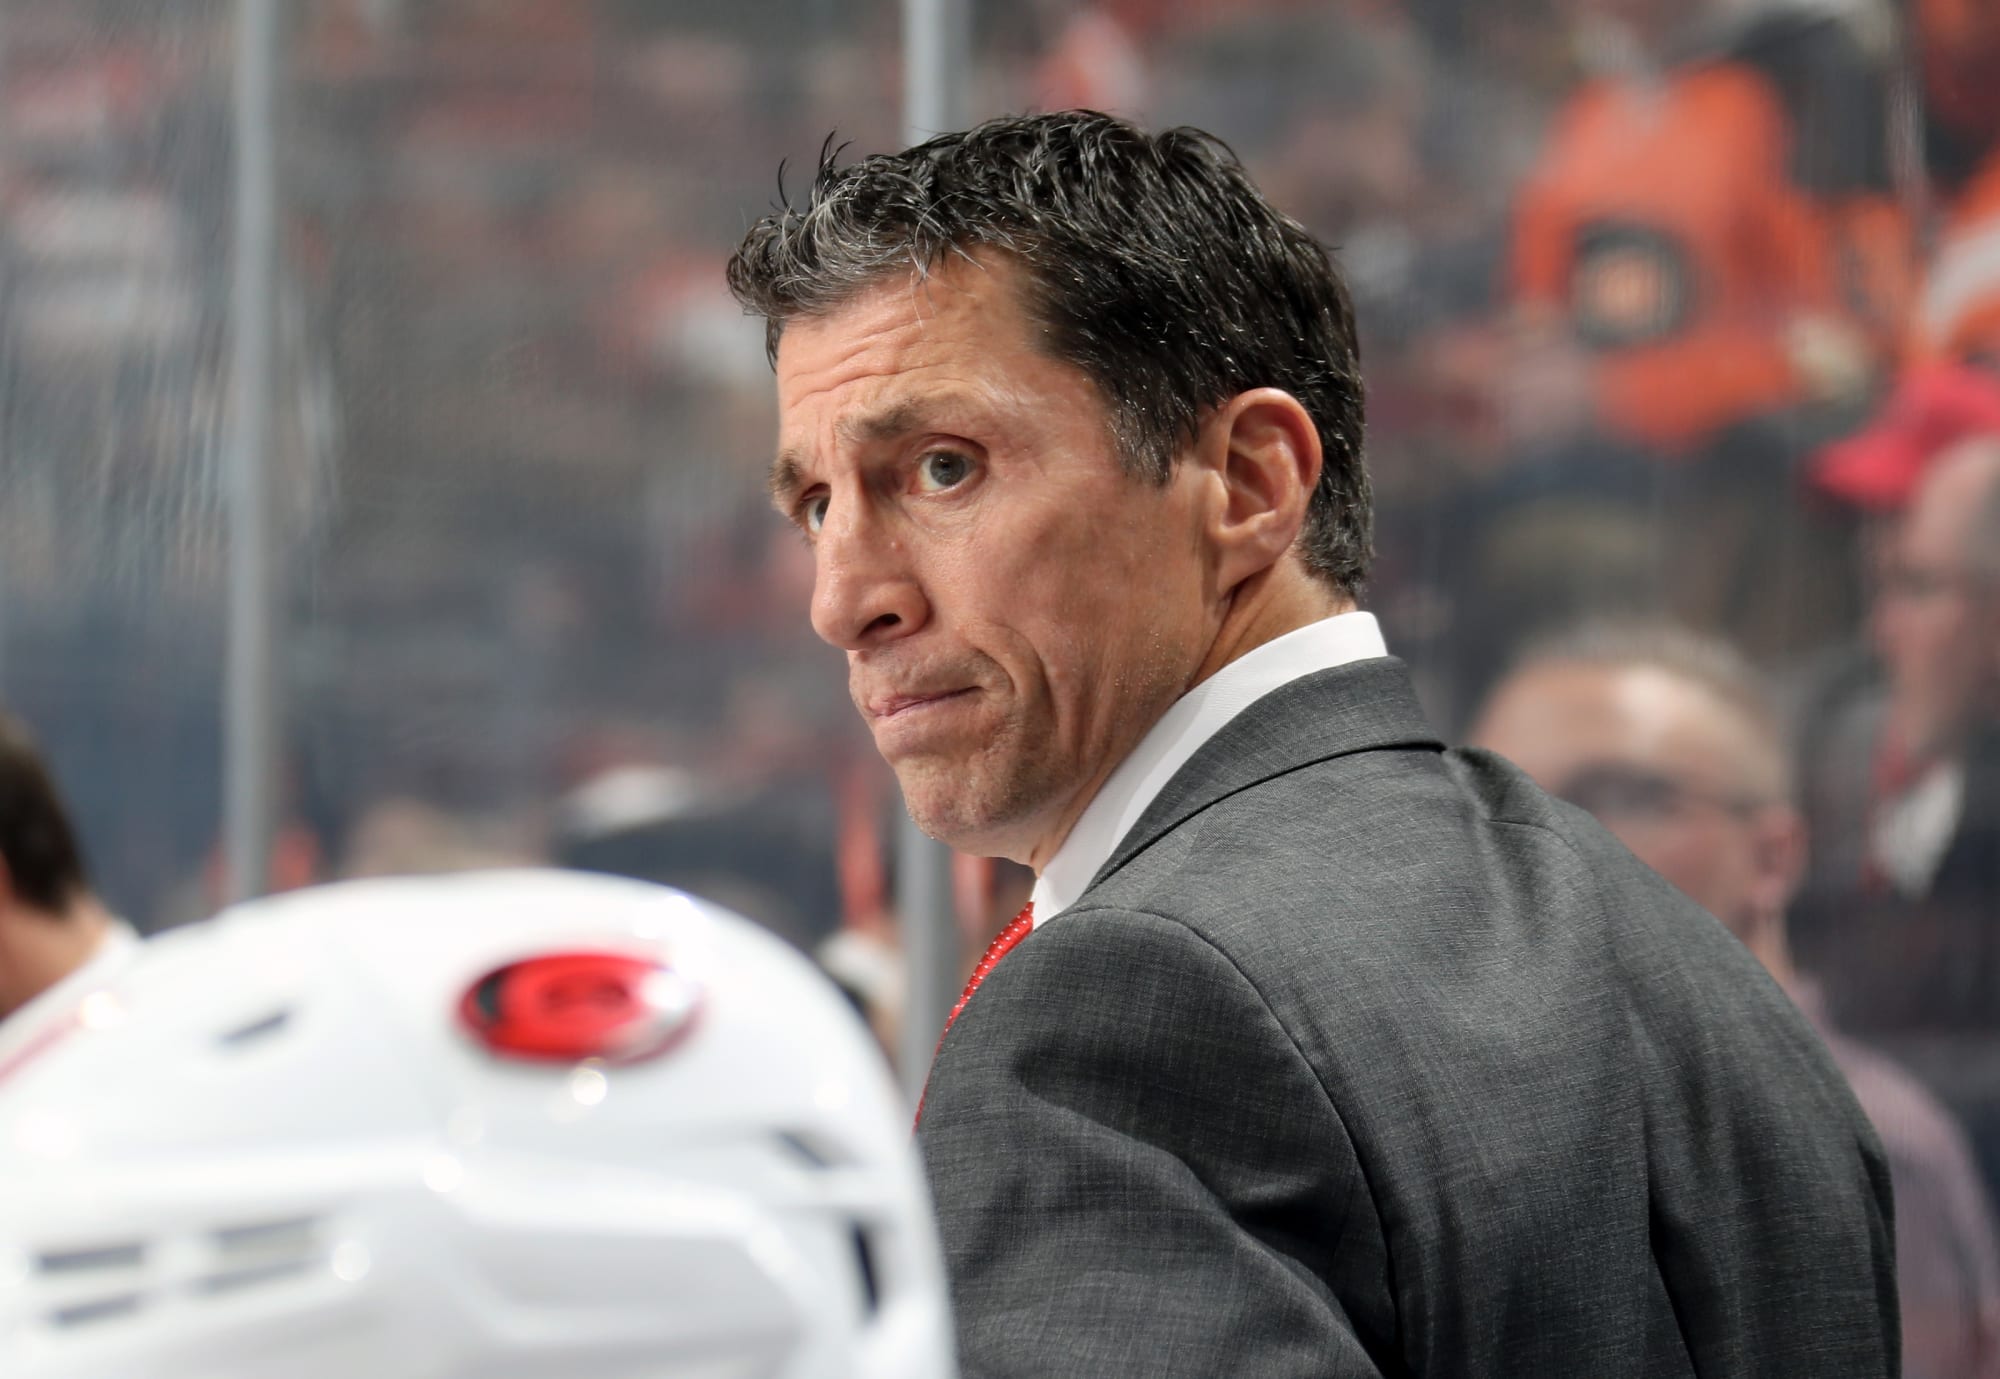 Hurricanes extend Brind'Amour, who wins coach of year honors